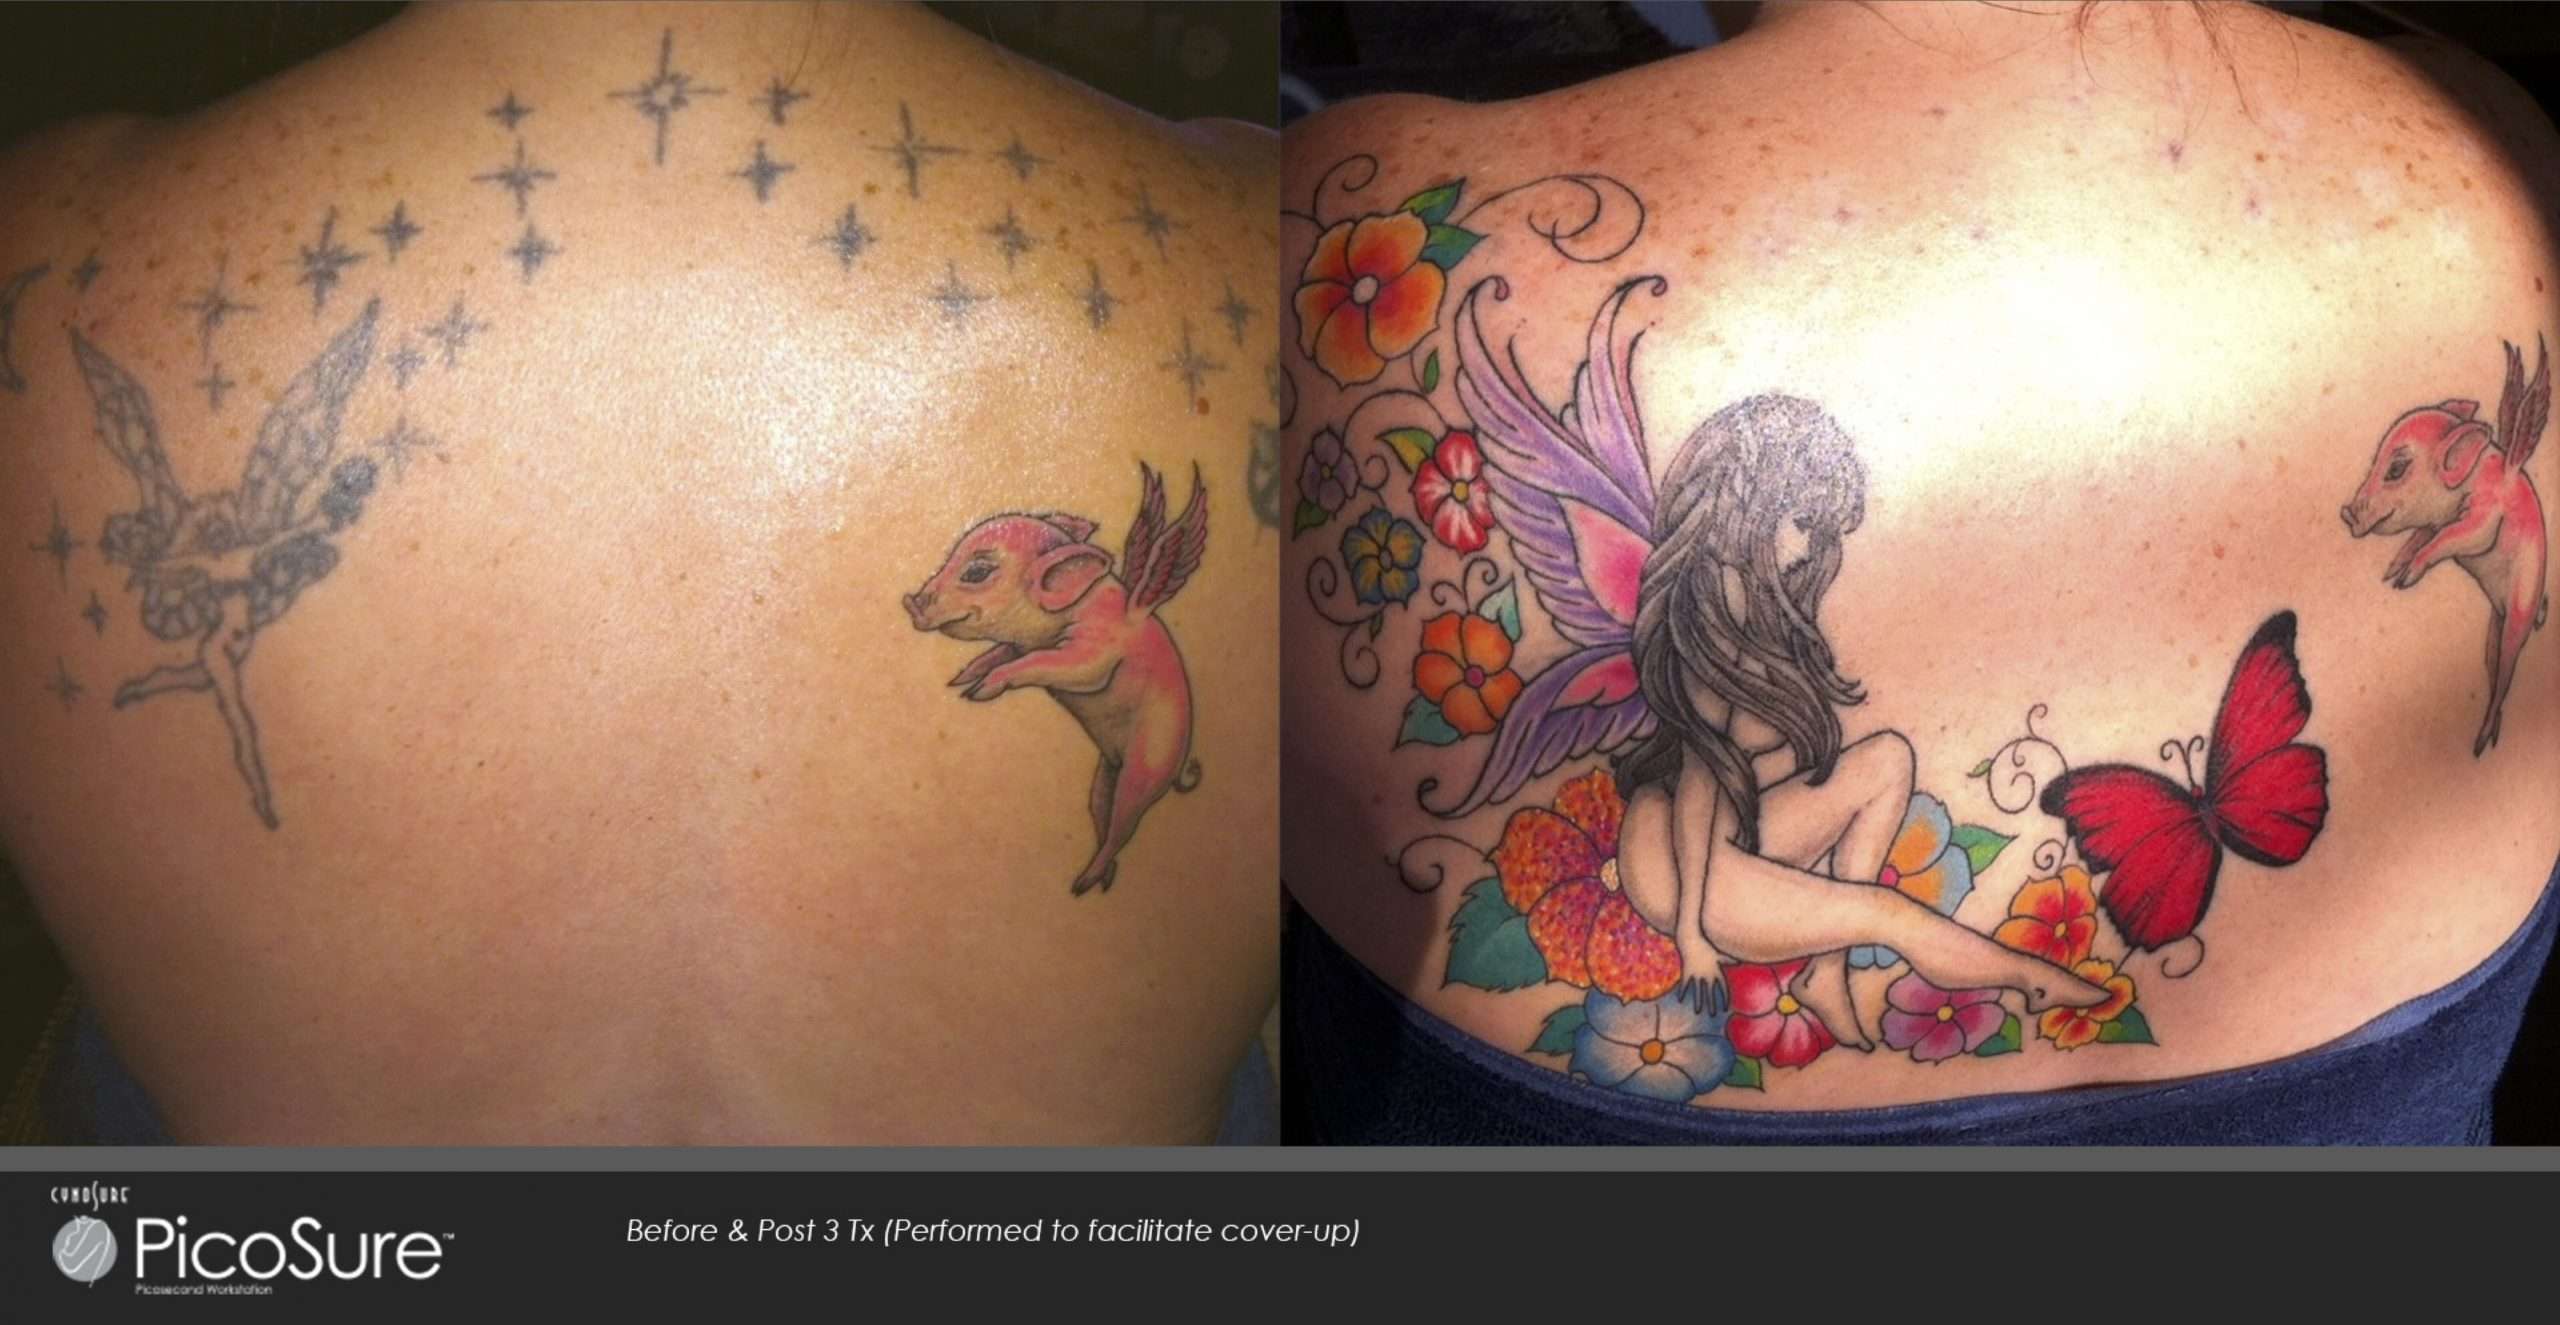 Orland Park laser tattoo removal